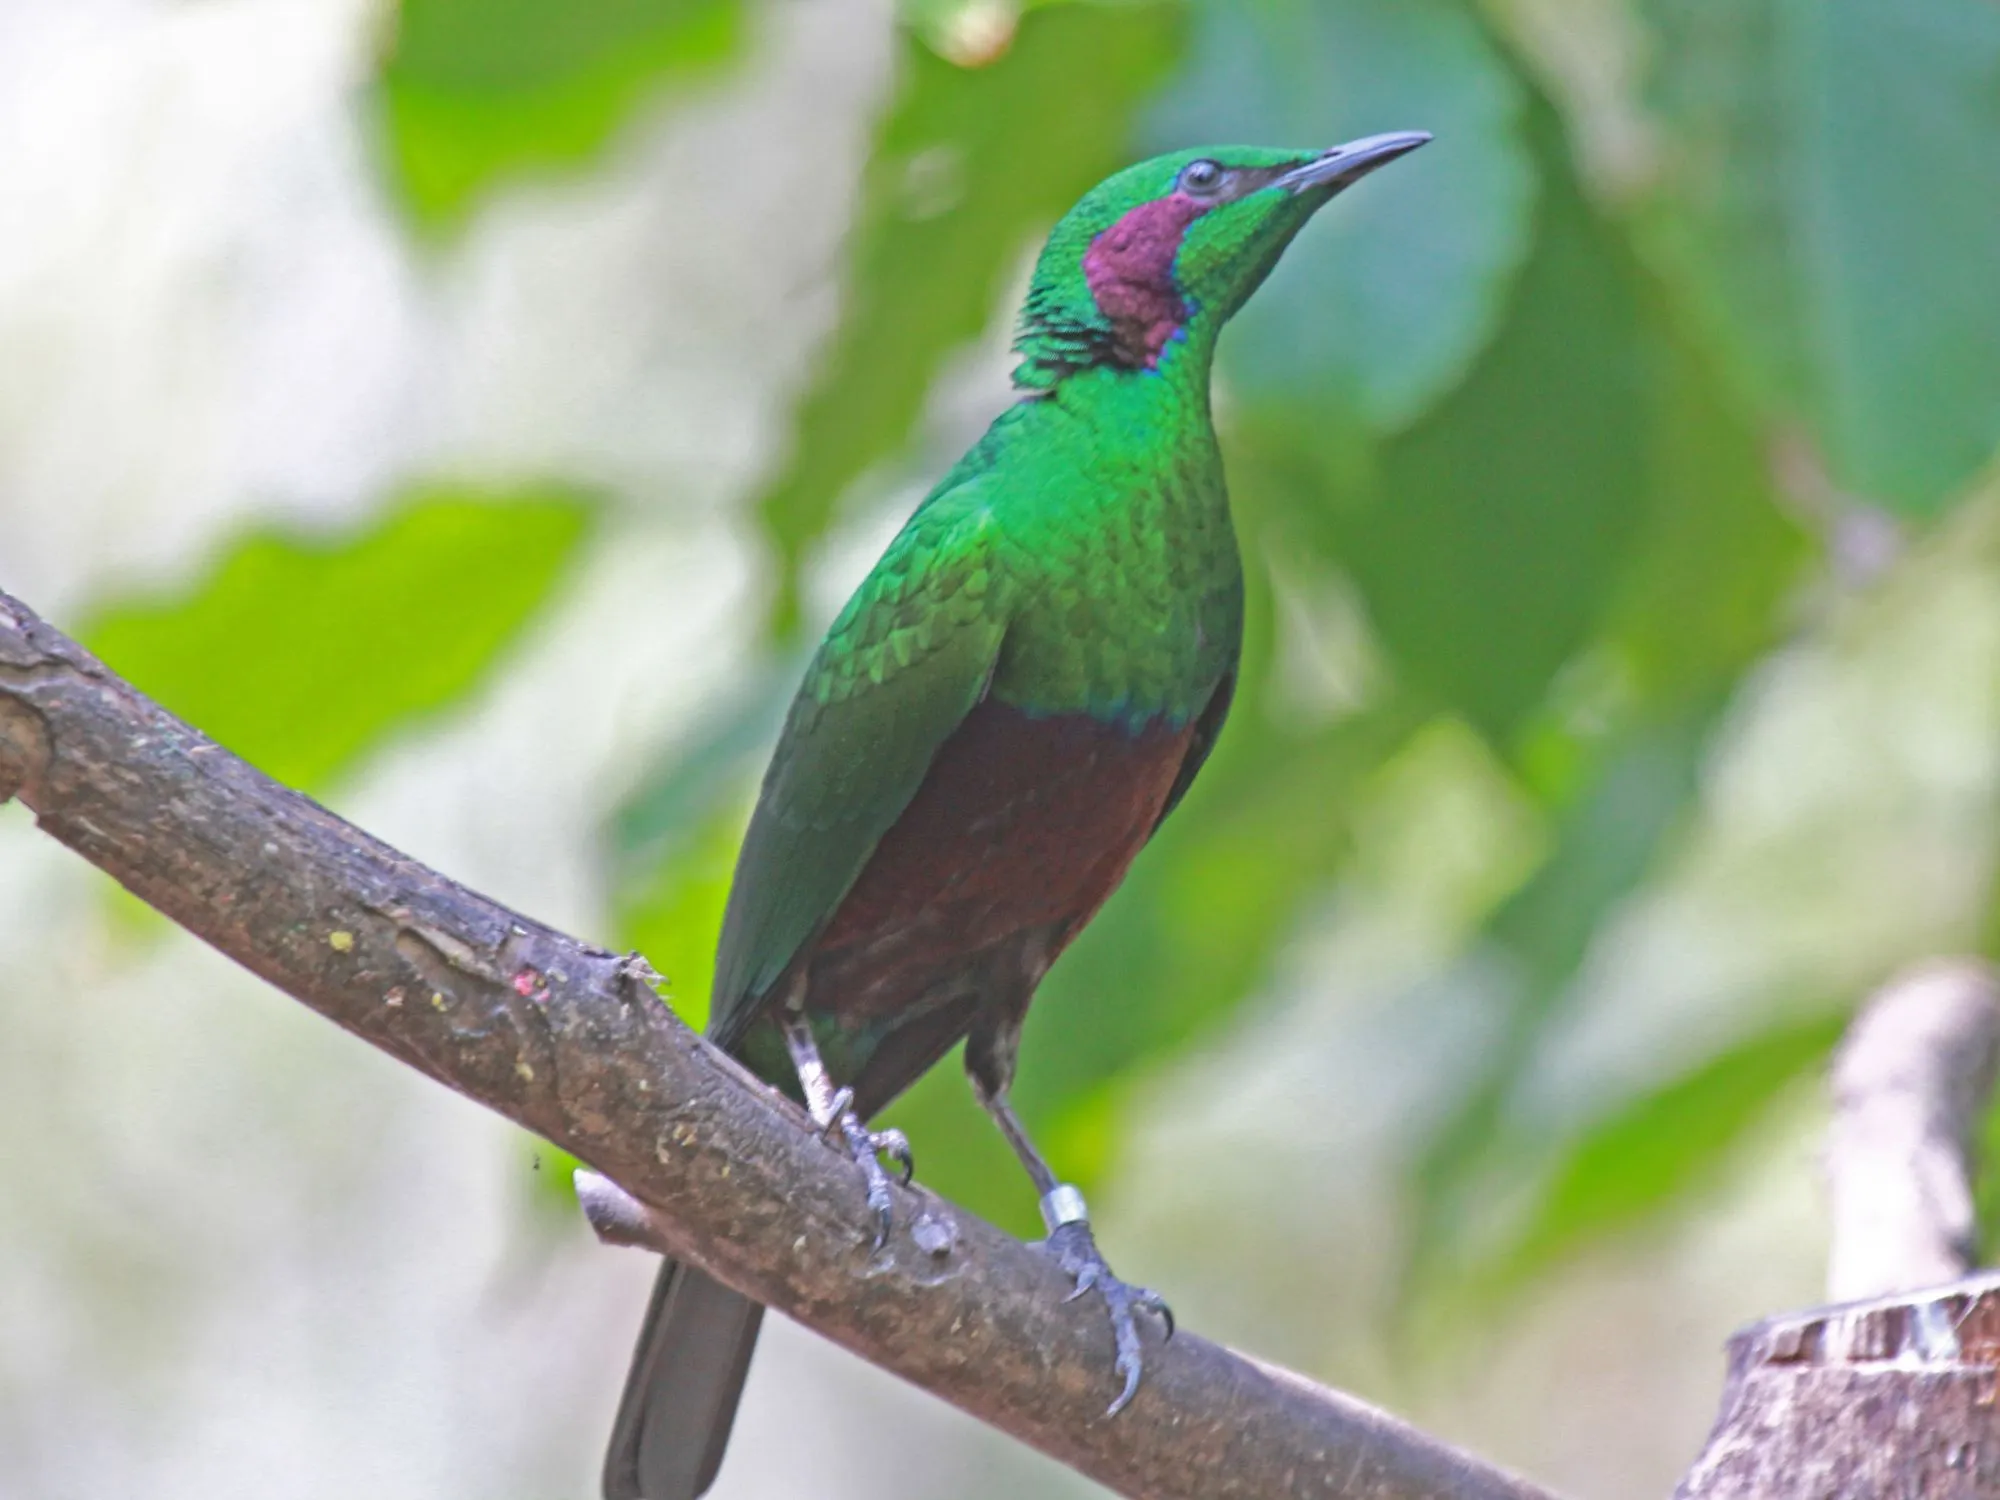 Read these interesting emerald starling facts to learn more about this bird, one of the smallest starlings.